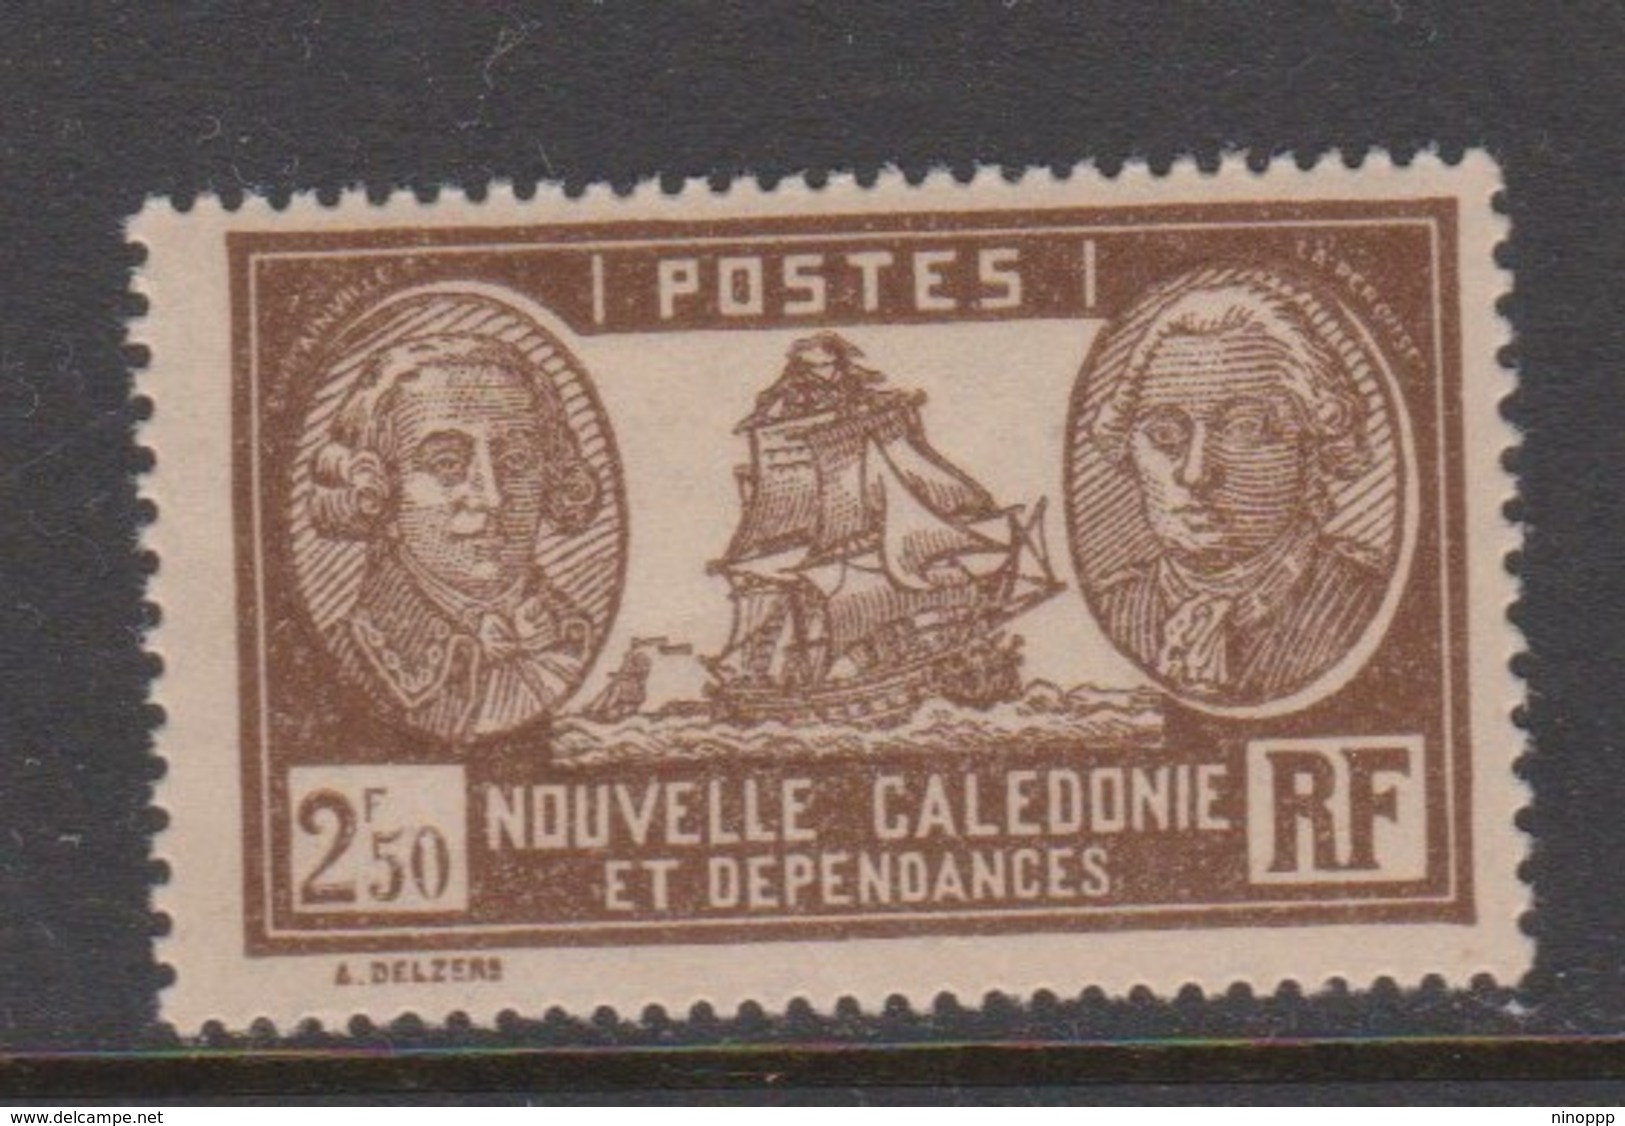 New Caledonia SG 174 1928 Definitives 2 F 50c Brown MNH - Neufs